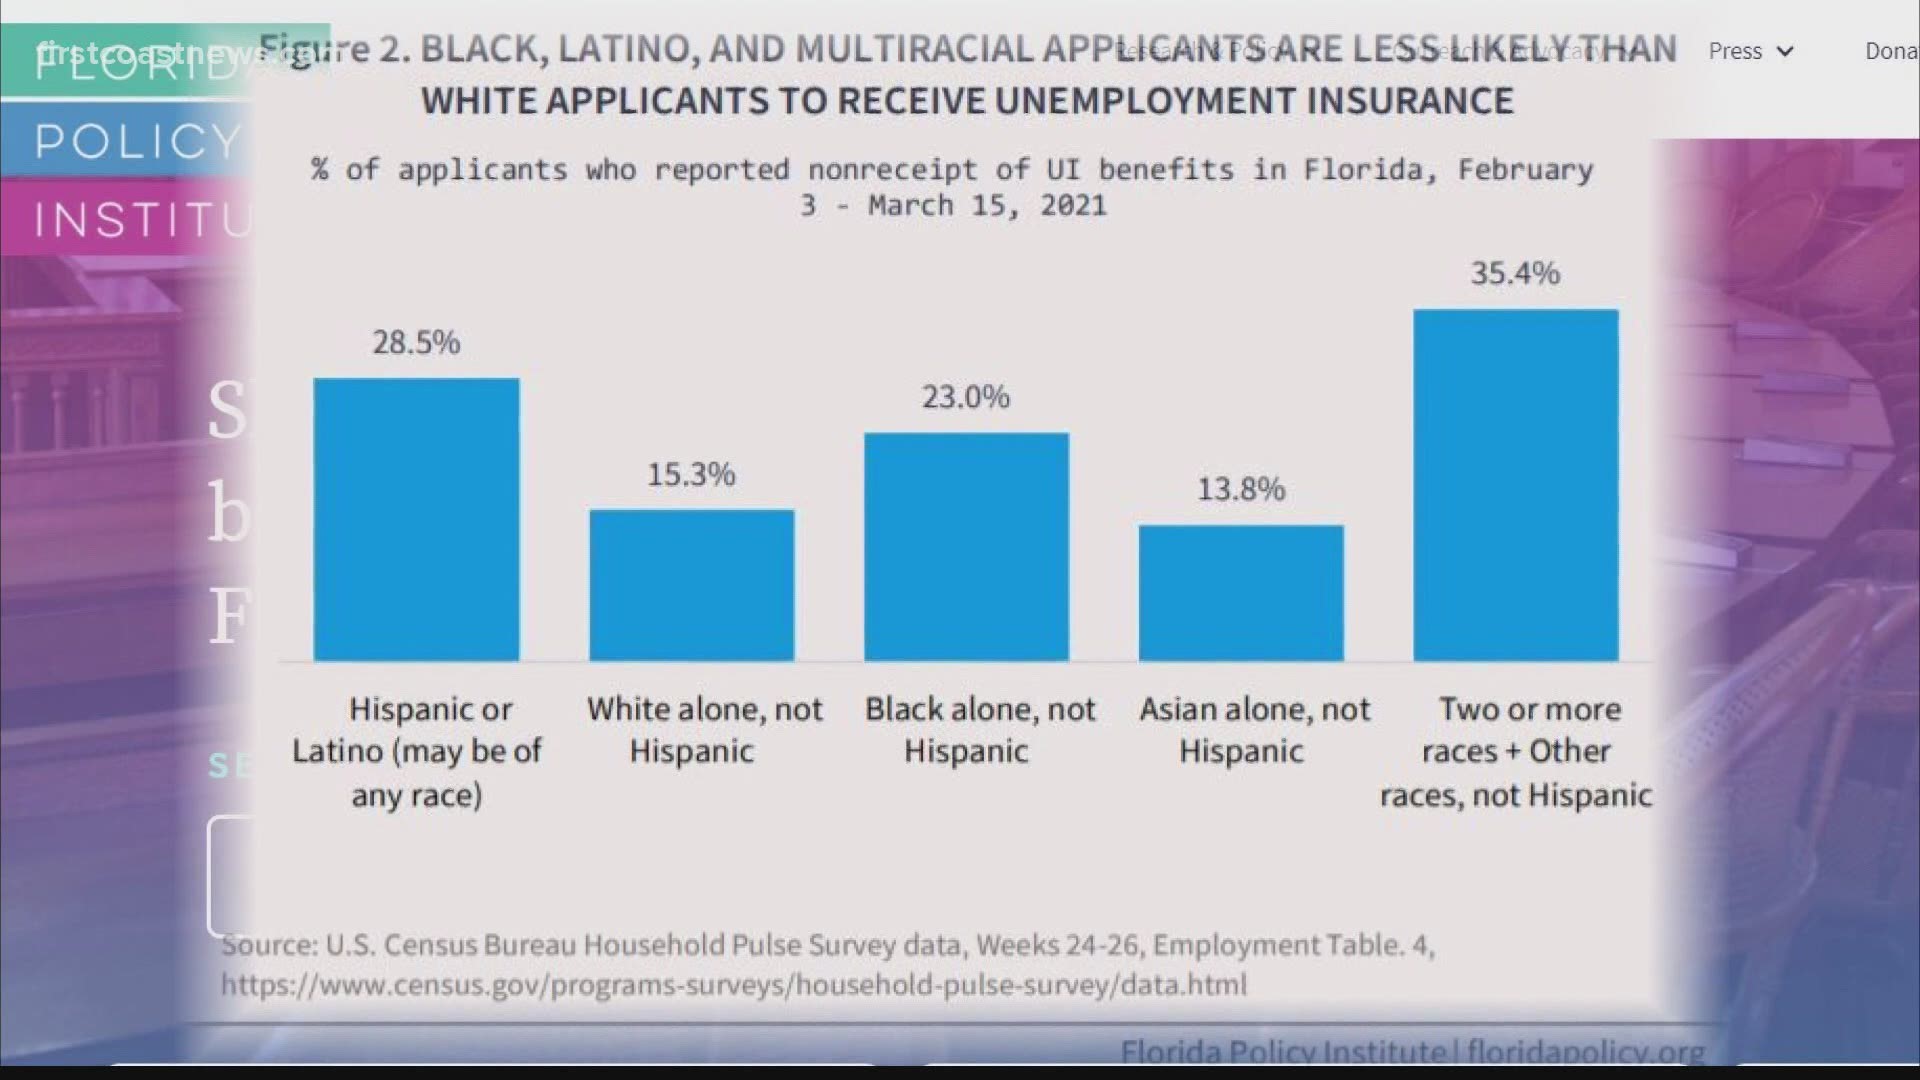 The problem may not be race-based, but rather which industry an applicant works in before becoming unemployed.